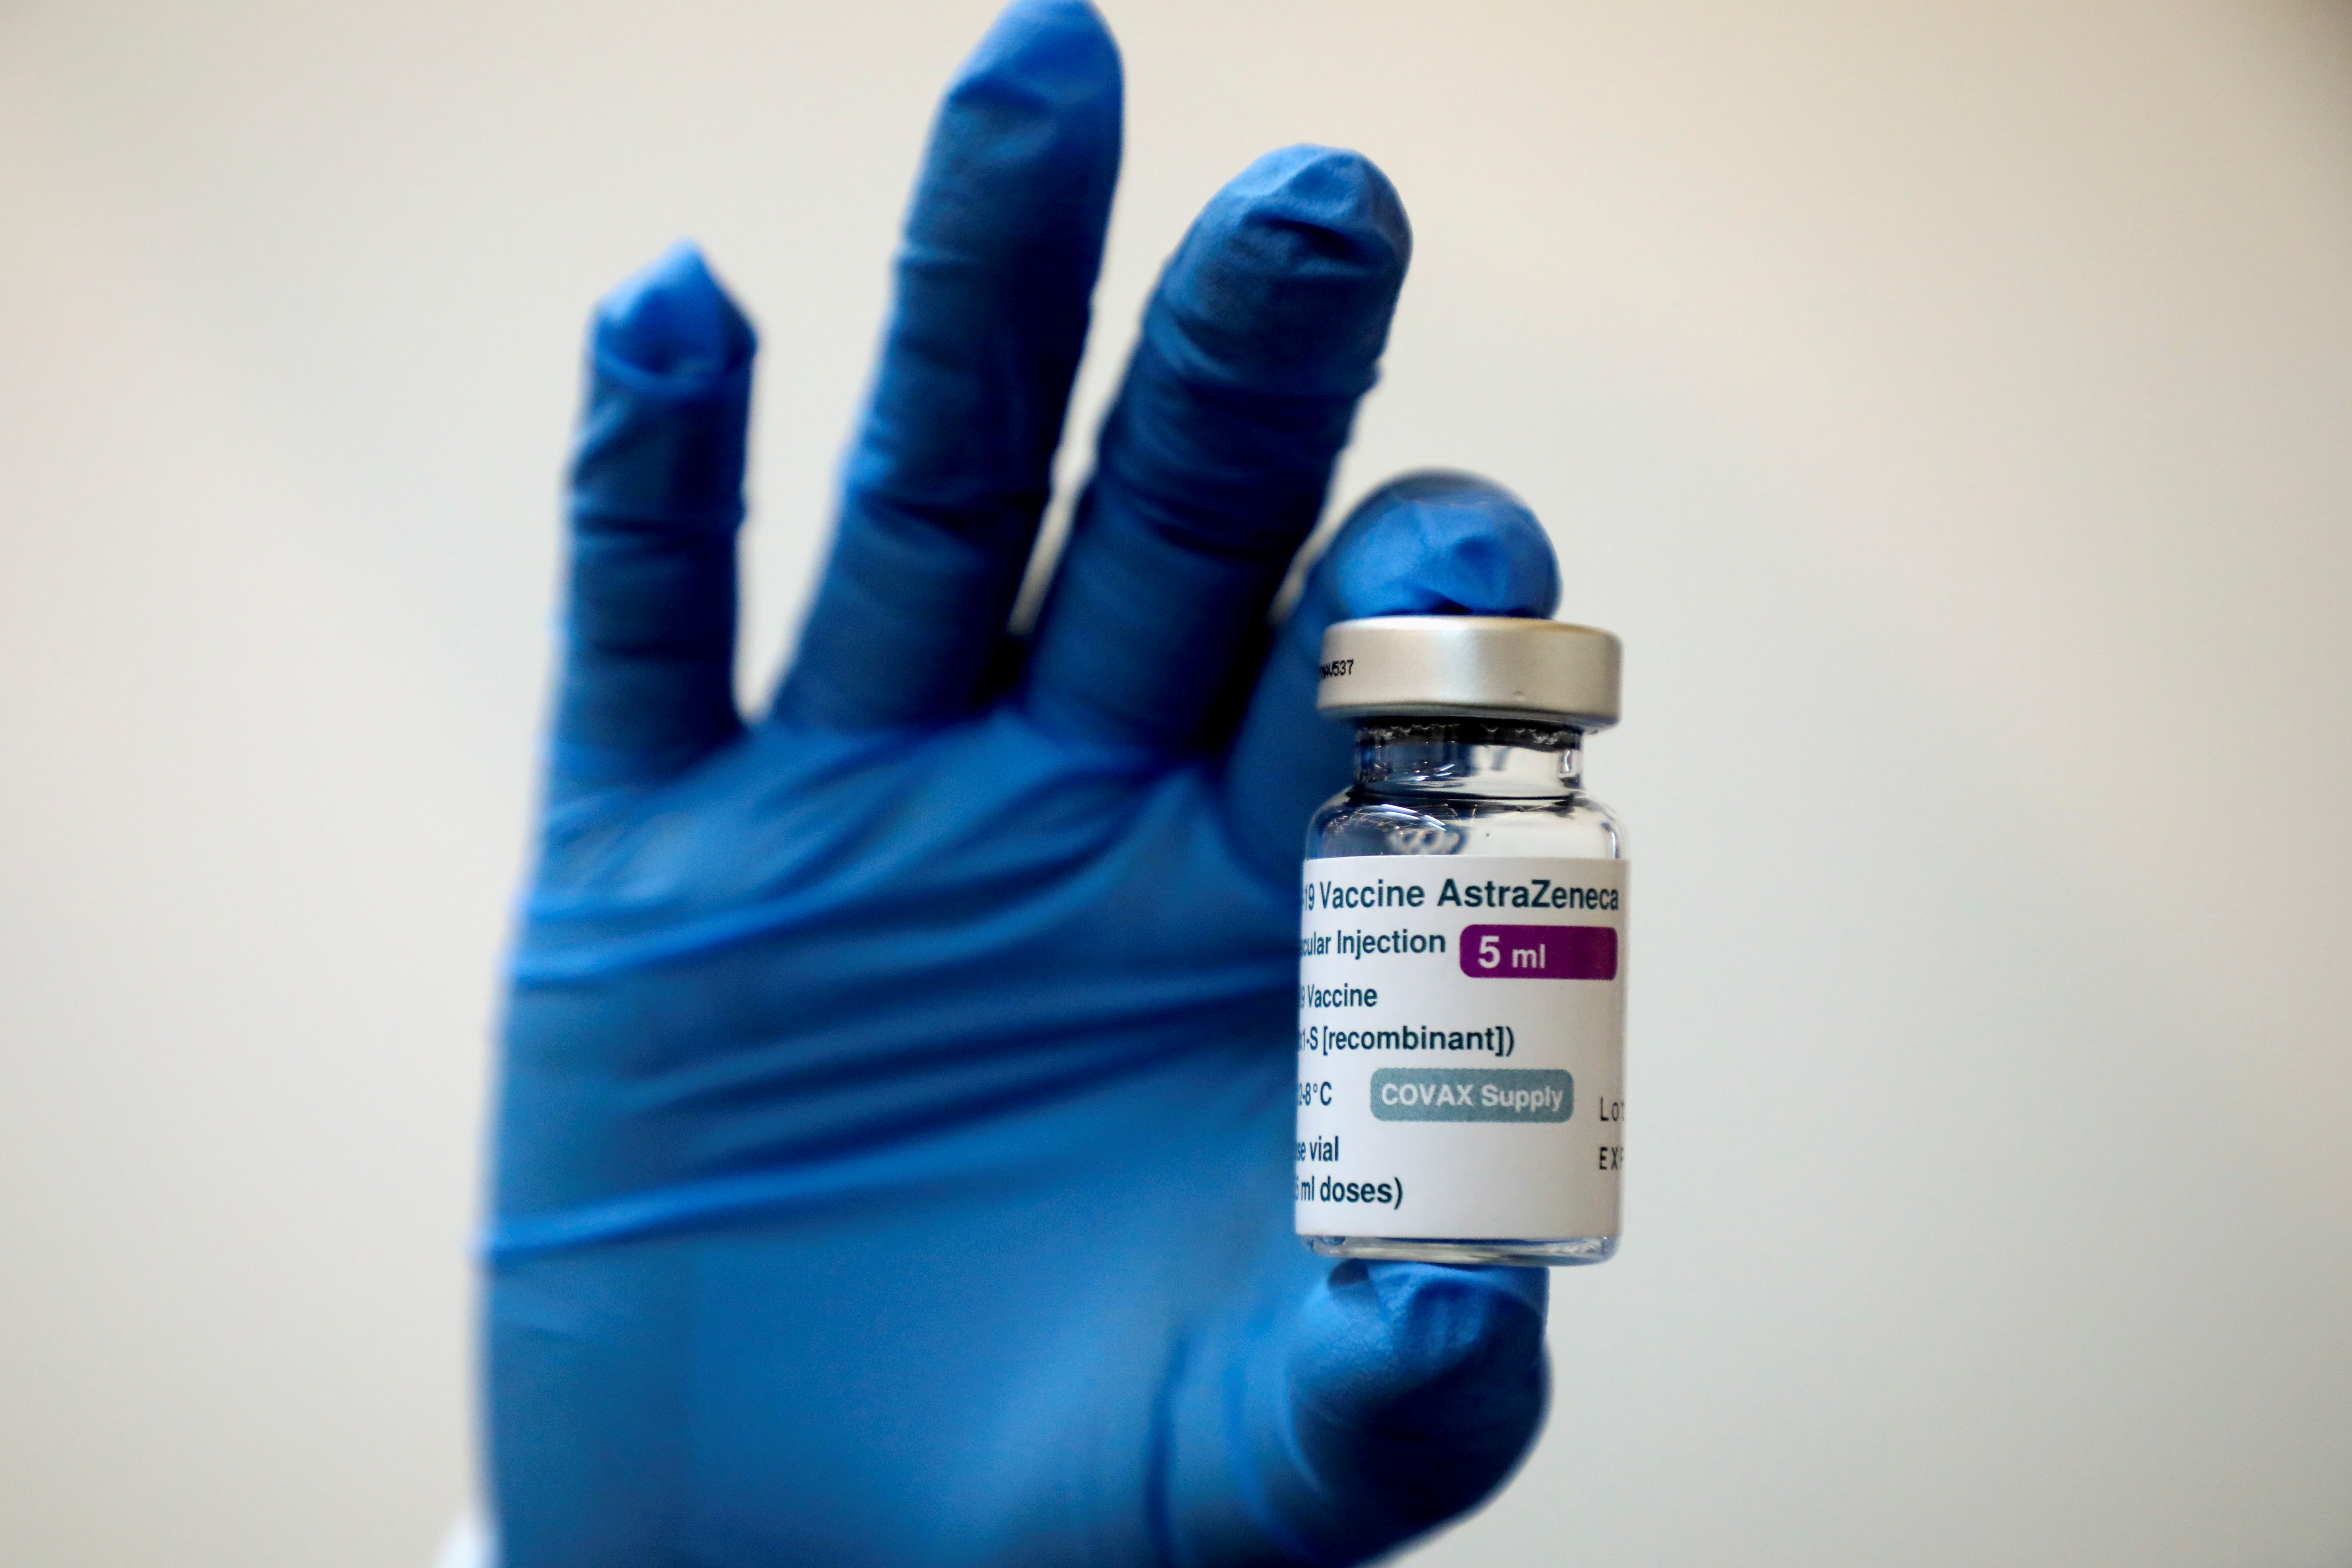 A medical worker holds a bottle of AstraZeneca's COVID-19 vaccine in this file photo